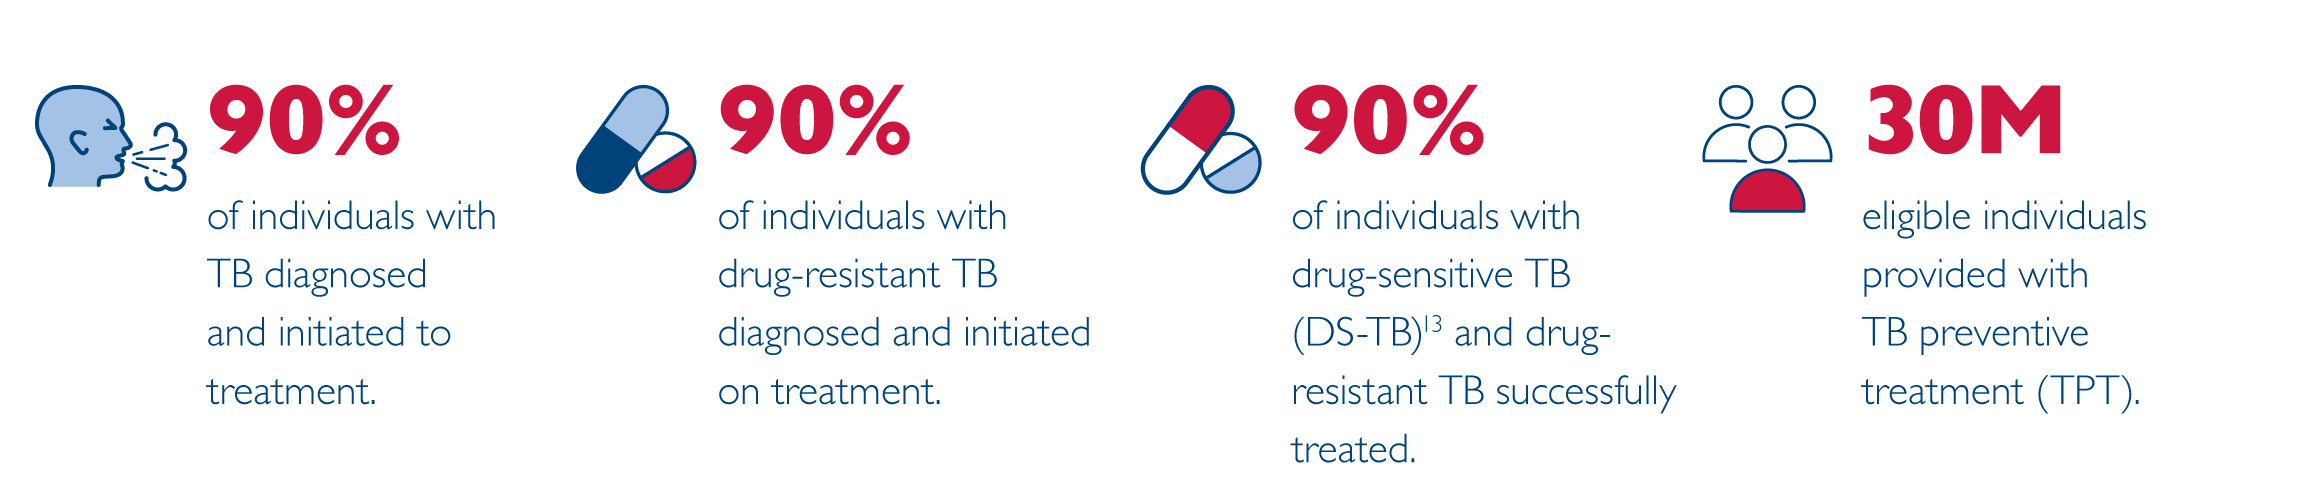 90% of individuals with TB diagnosed and initiated to treatment.
 90% of individuals with drug-resistant TB diagnosed and initiated on treatment.
 90% if individuals with drug-sensitive TB (DS-TB) and drub resistant TB successfully treated.
 30M eligible individuals provided with TB preventative treatment (TPT).